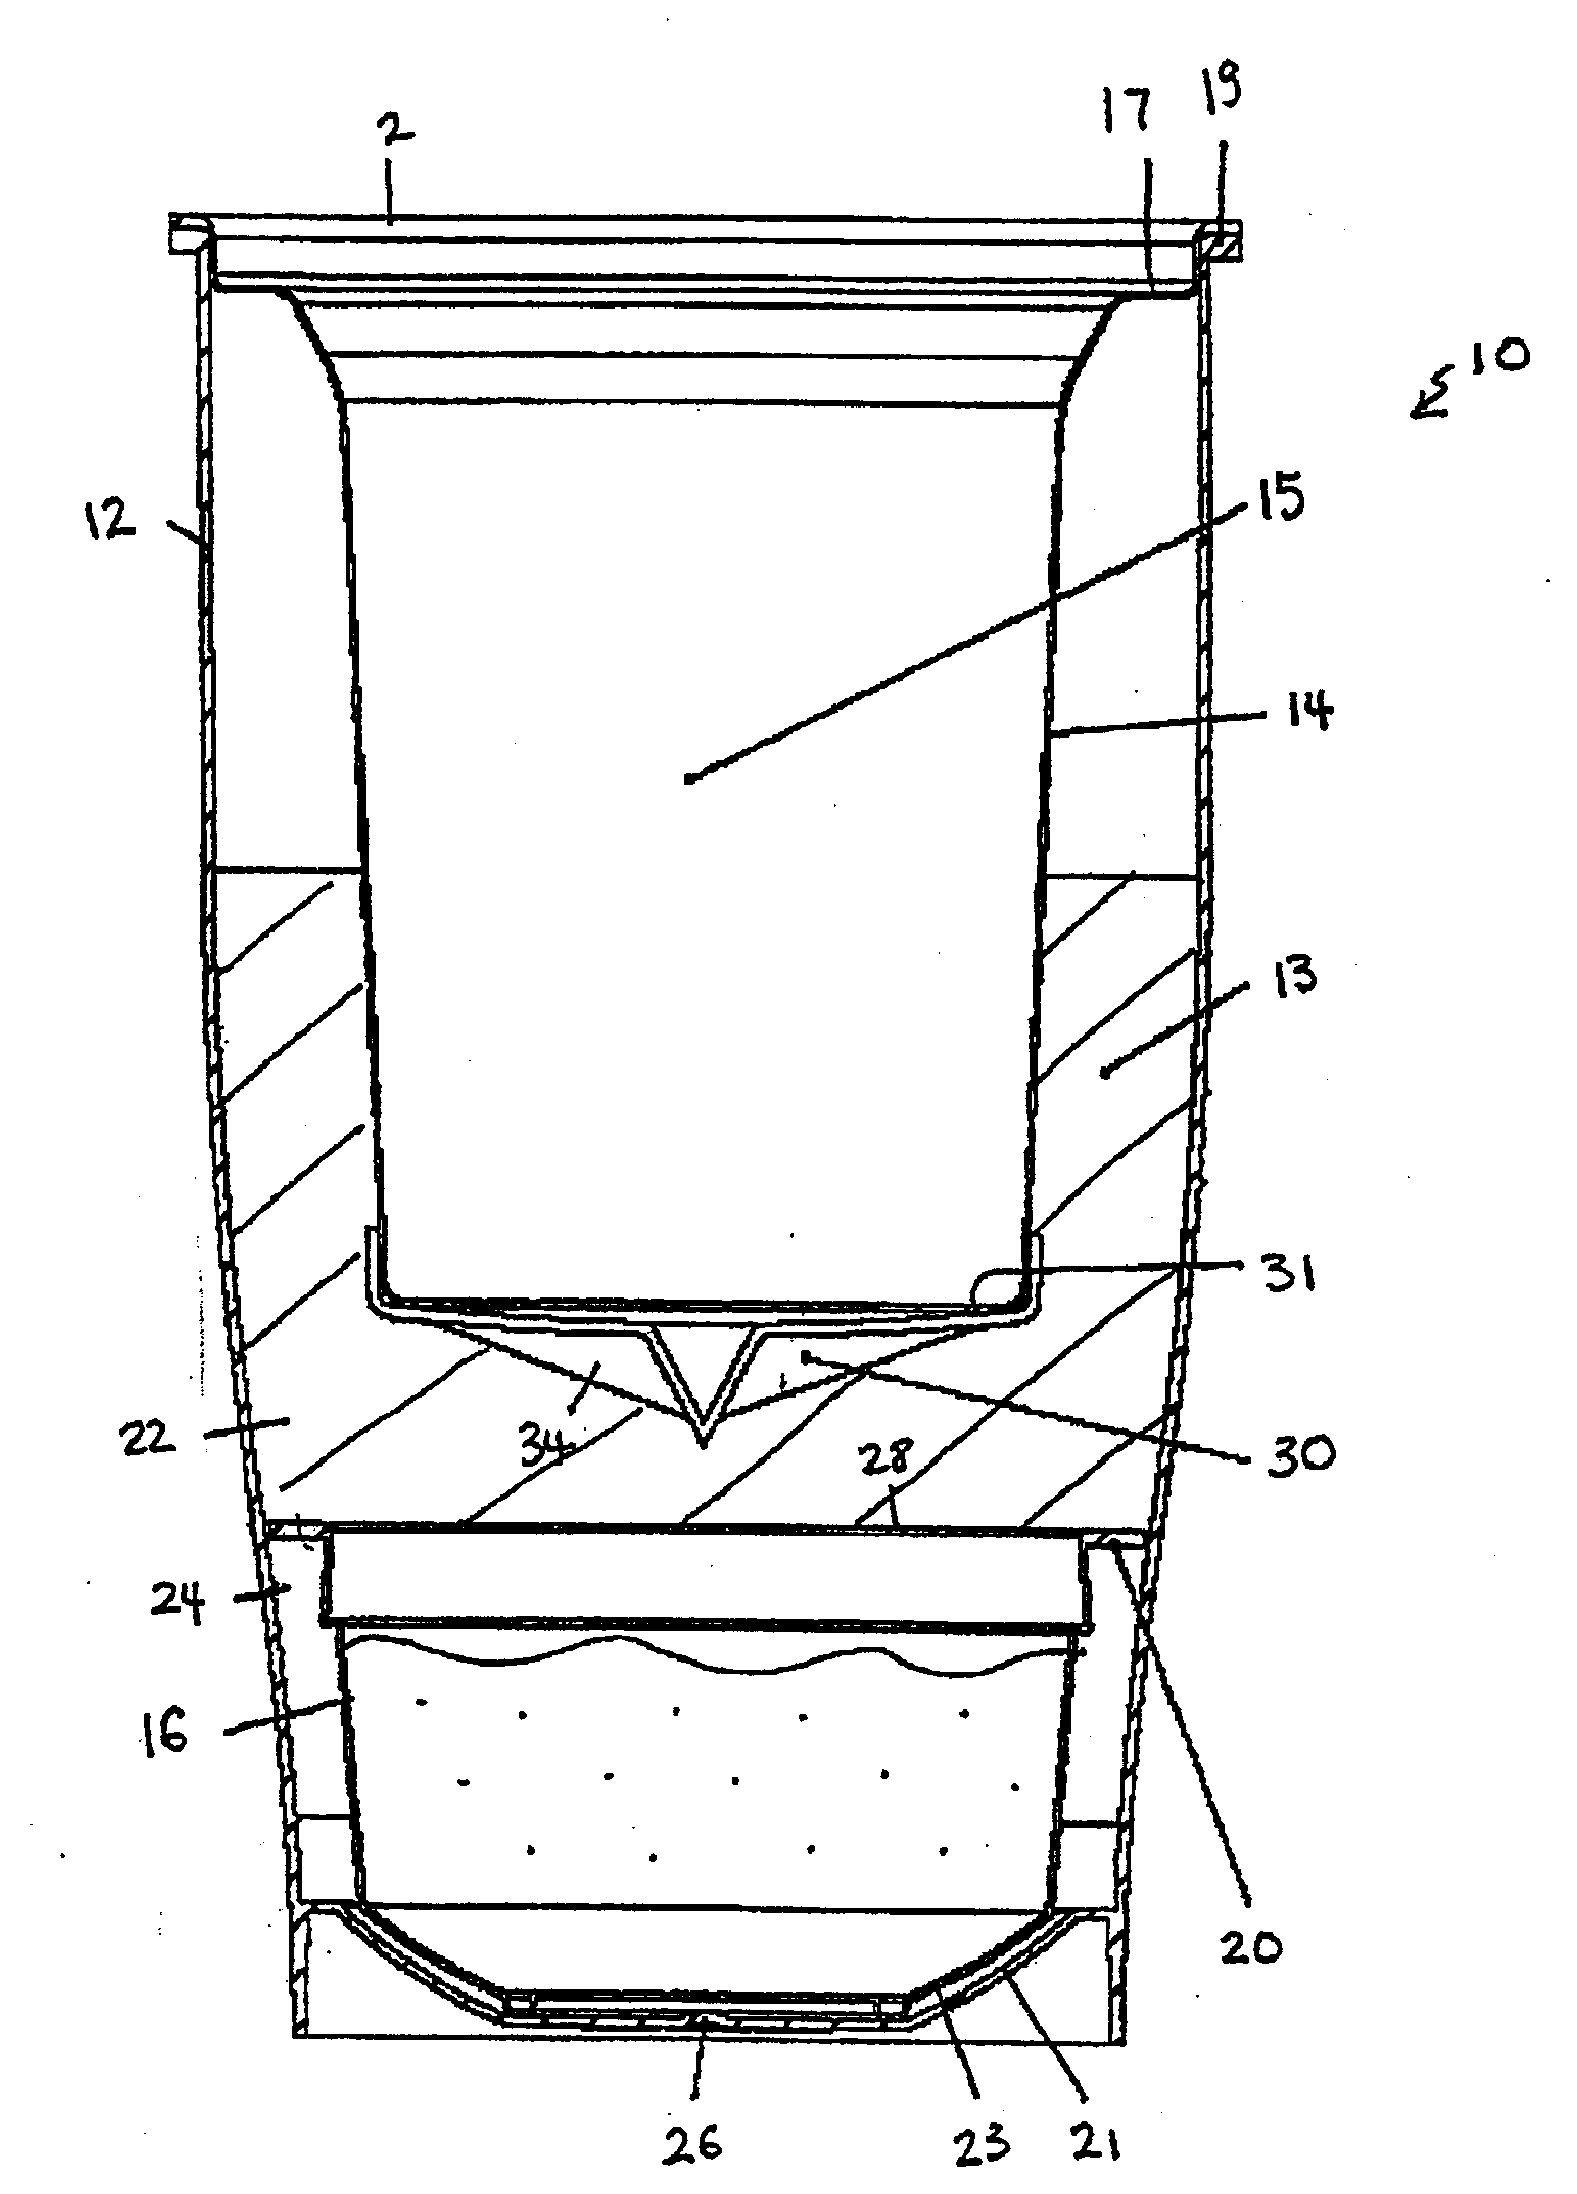 Self-heating apparatuses using solid chemical reactants